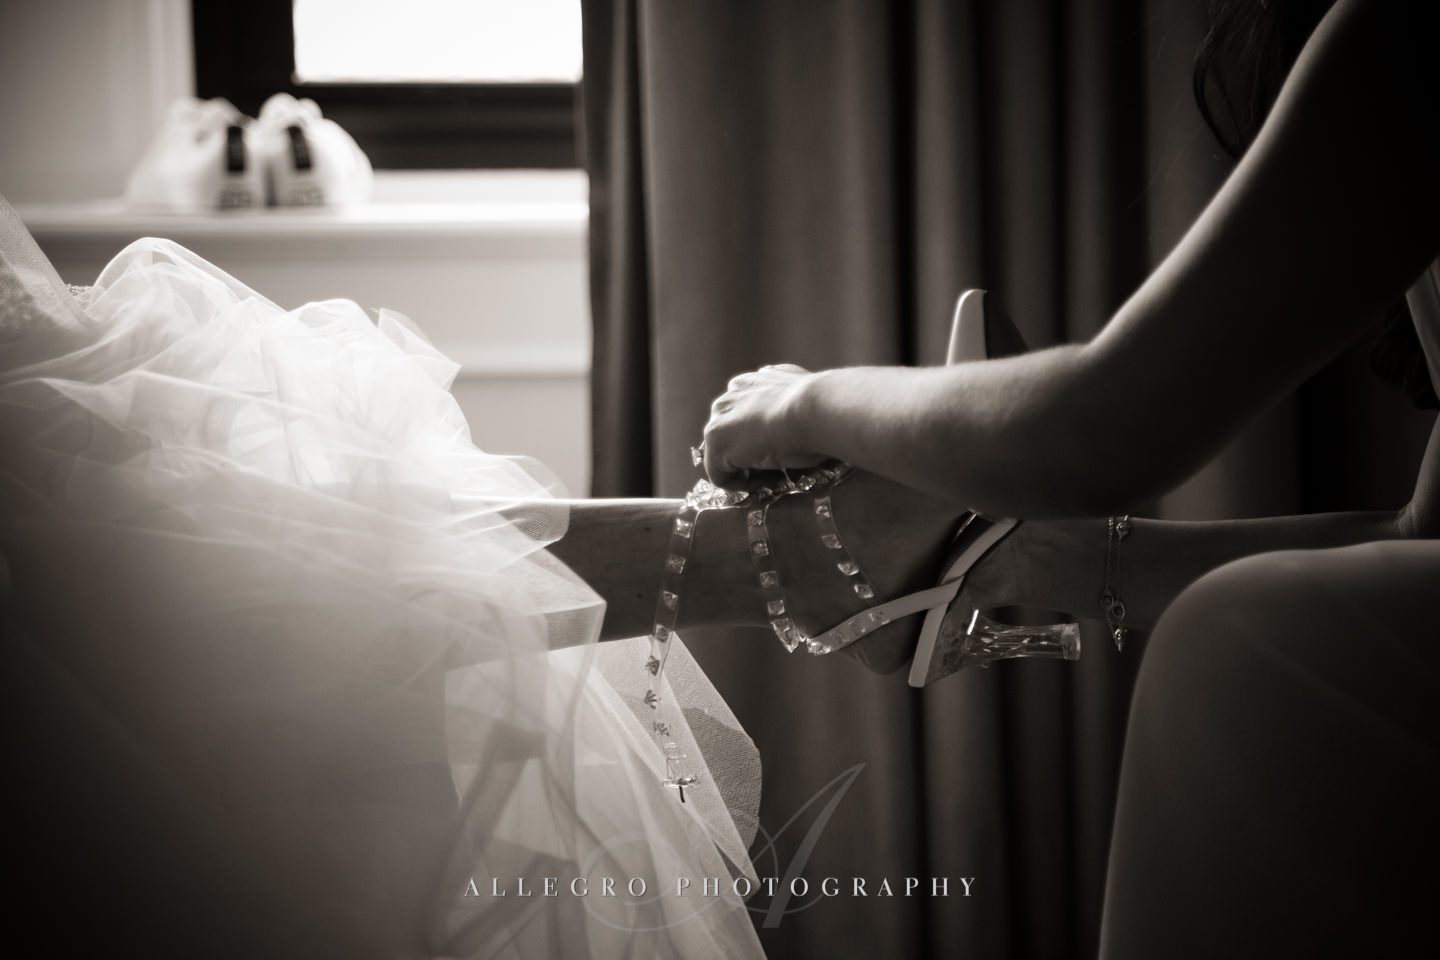 putting on shoes - photo by Allegro Photography